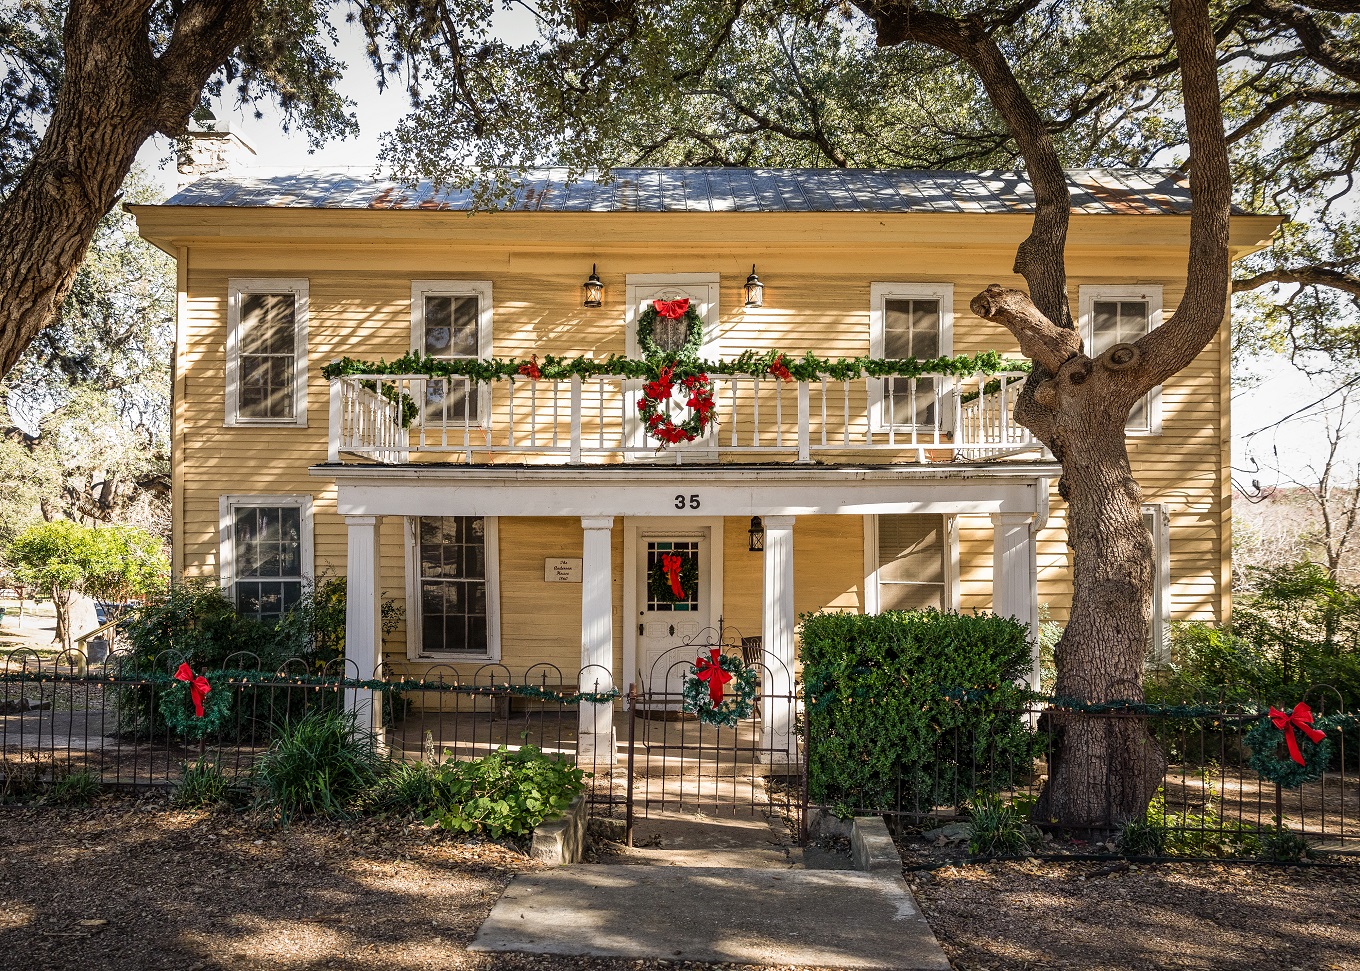 Yellow historic home decorated for Christmas